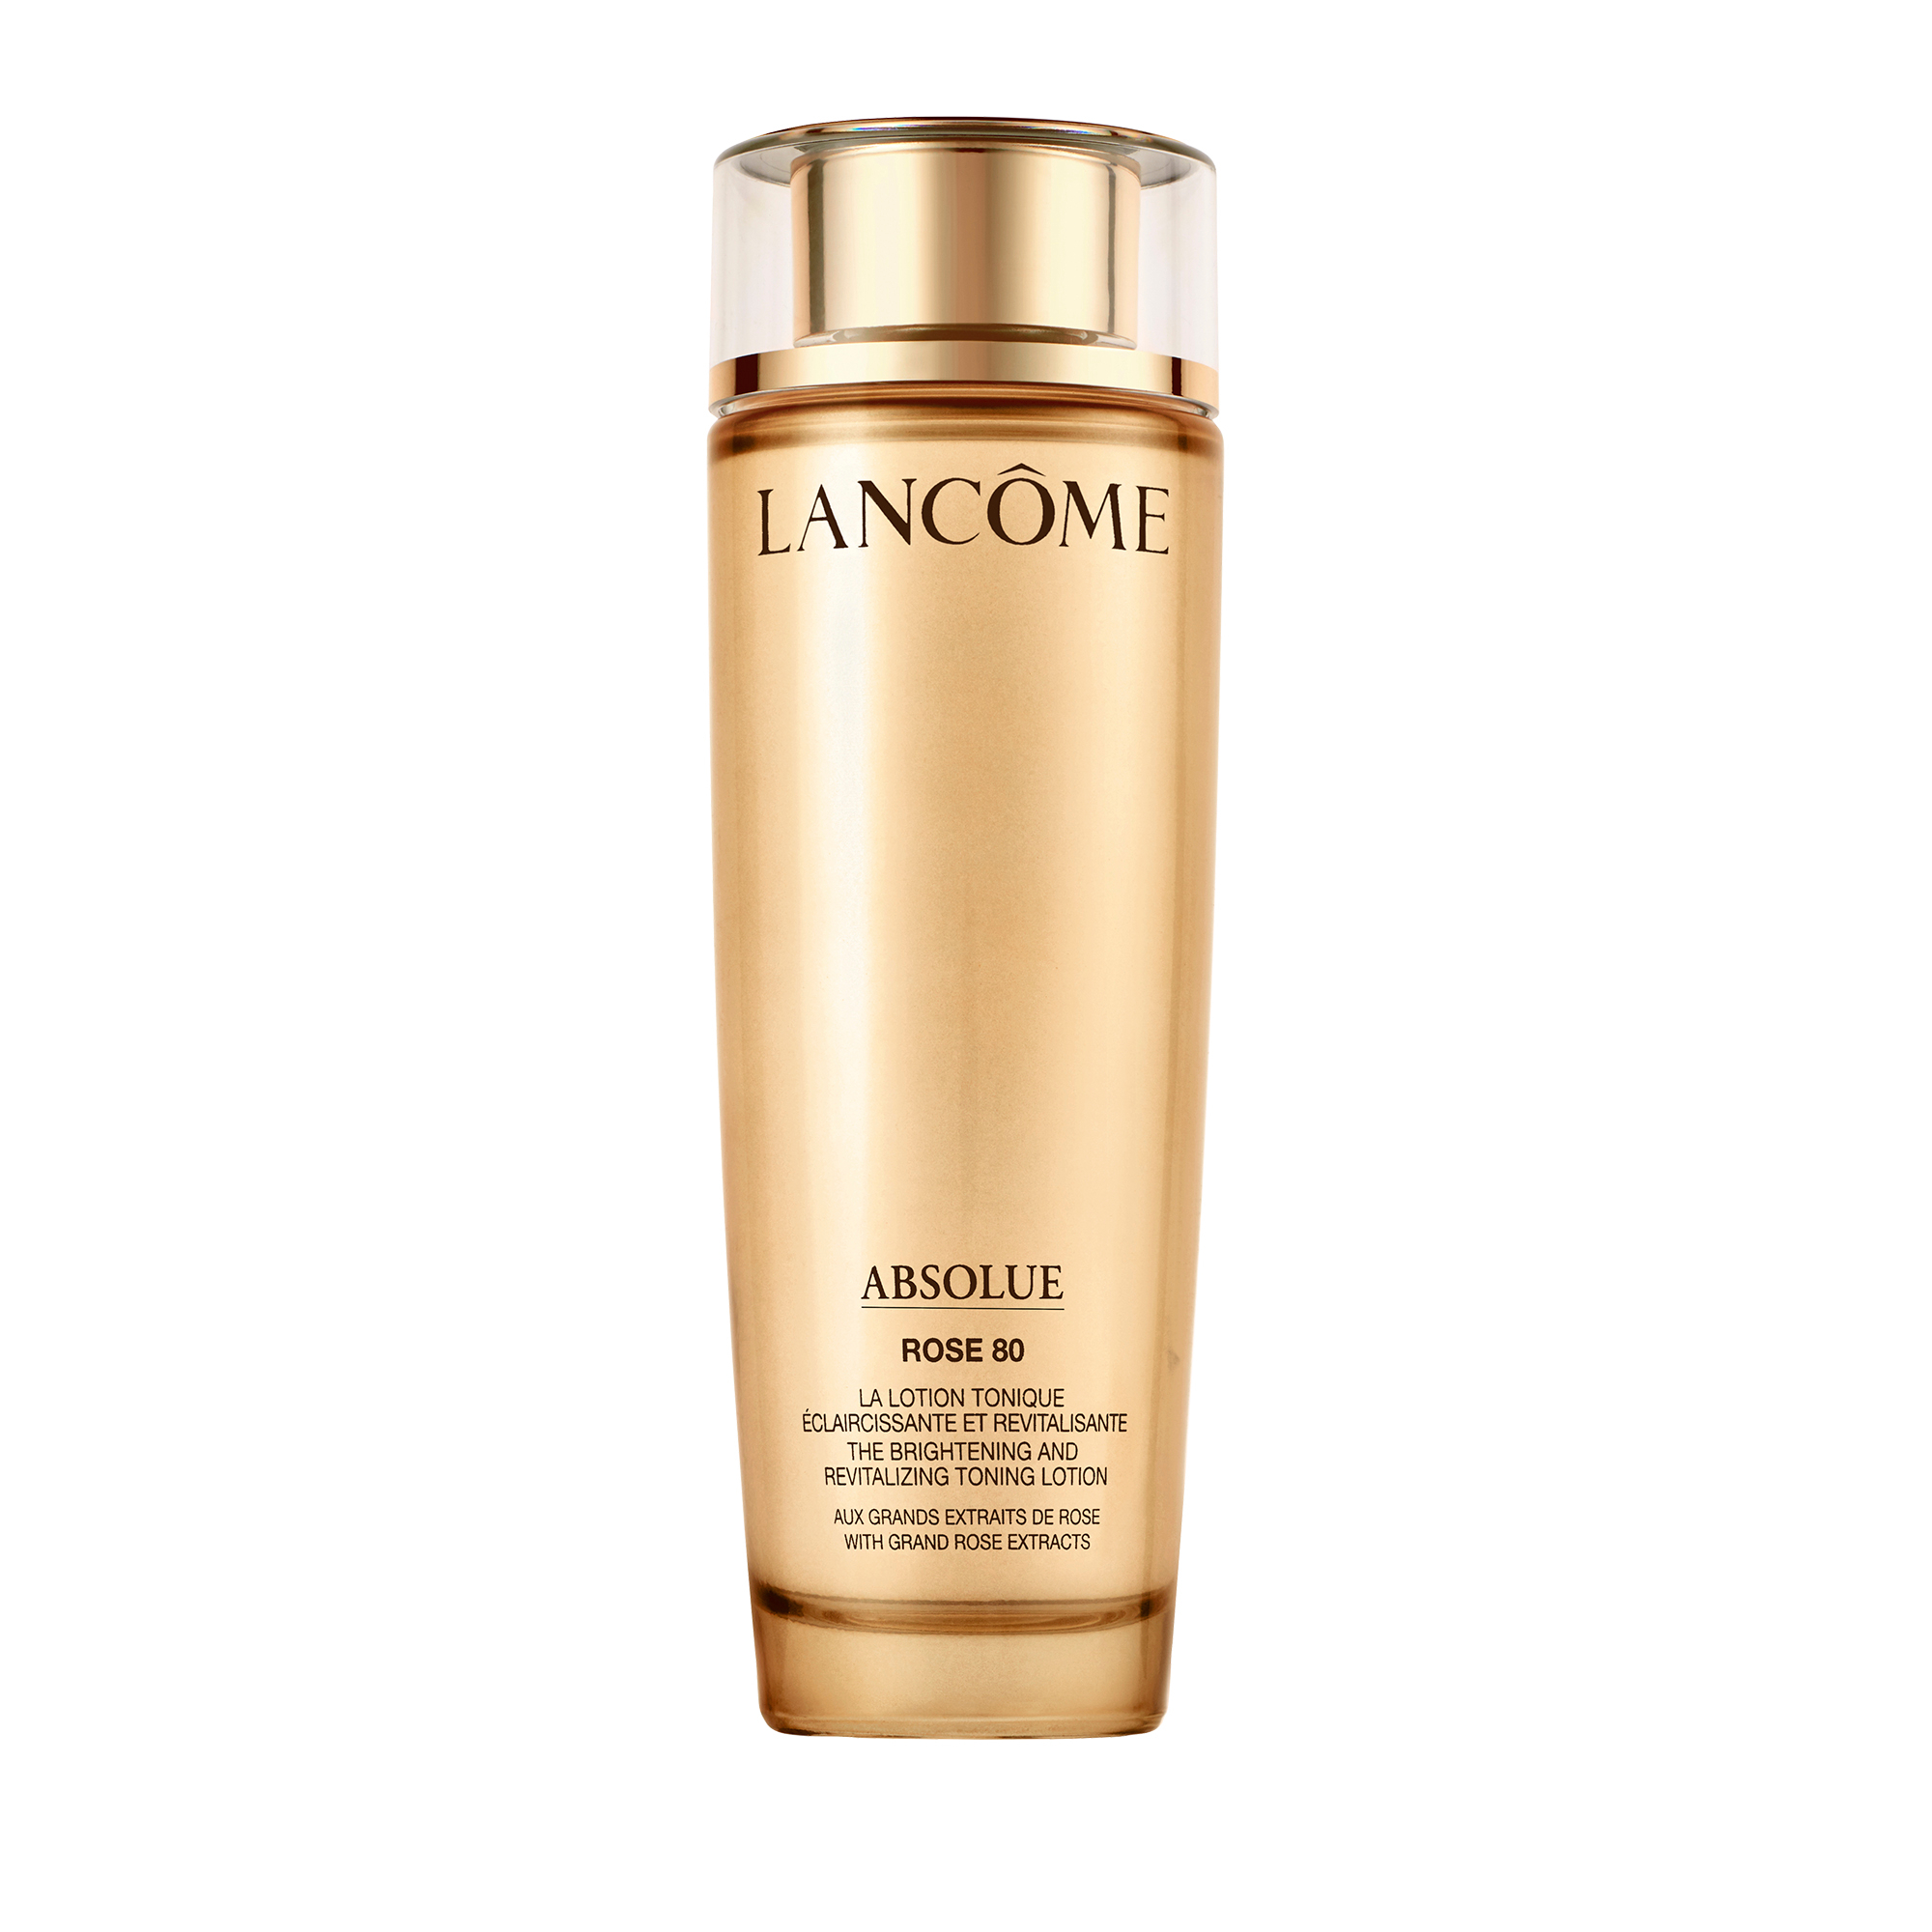  Absolue Rose Revitalizing Tonning Lotion